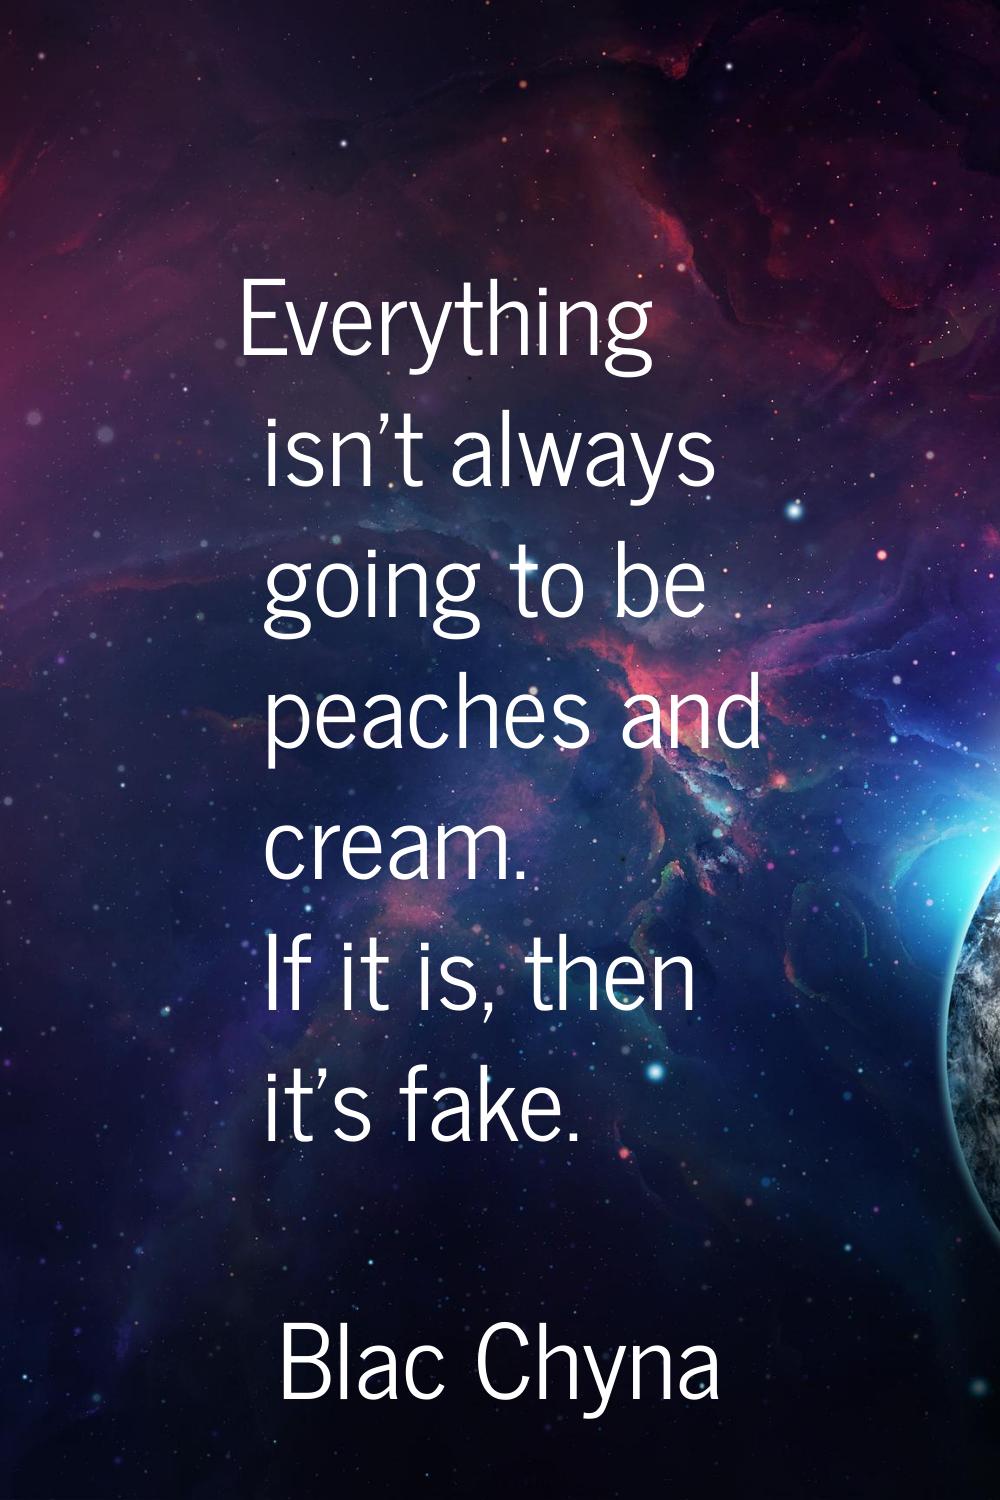 Everything isn't always going to be peaches and cream. If it is, then it's fake.